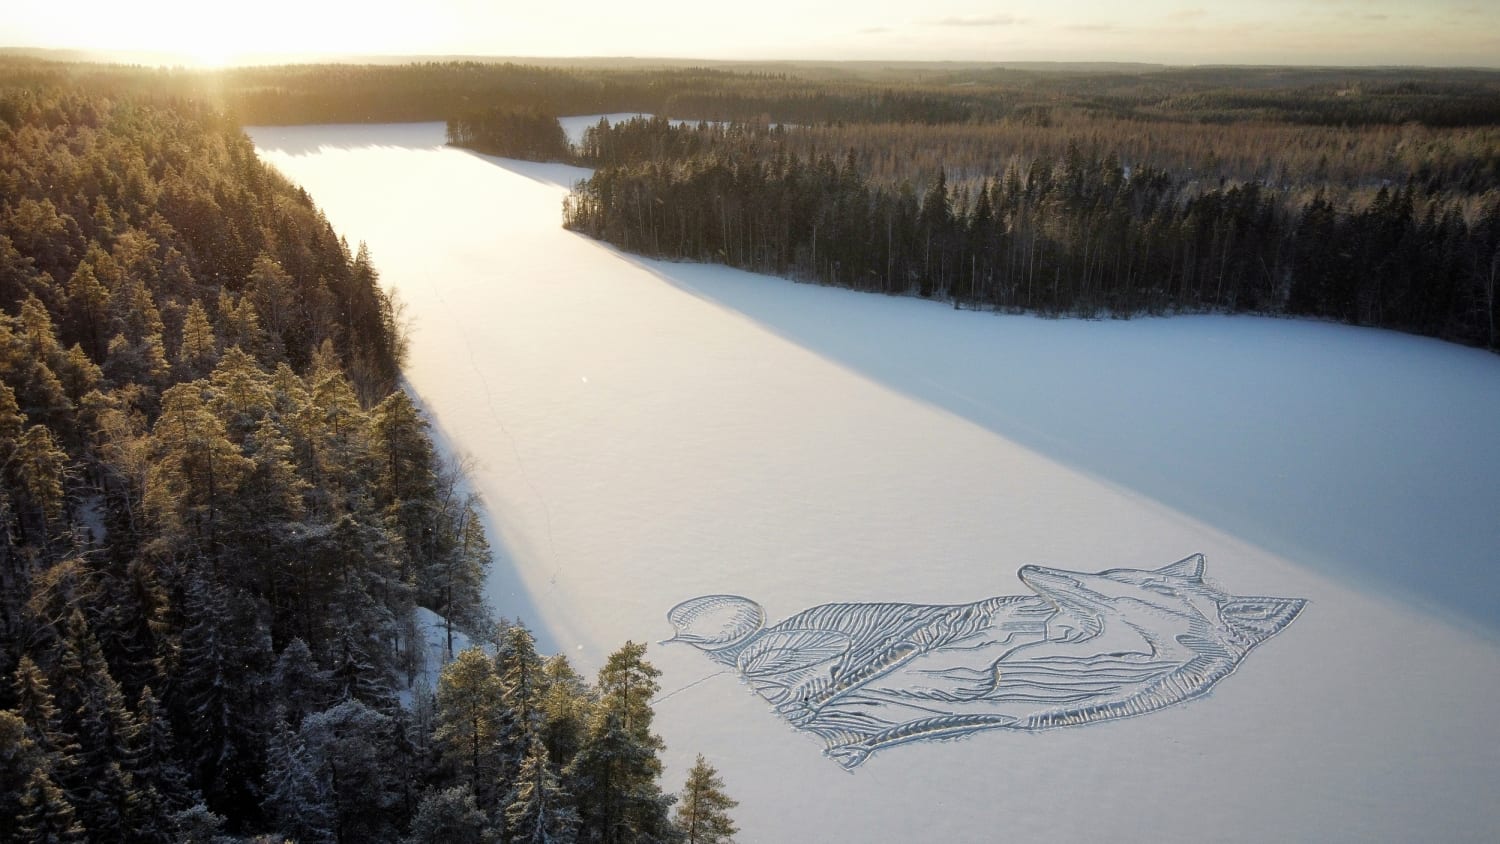 This artist uses a frozen Finland lake as his massive canvas